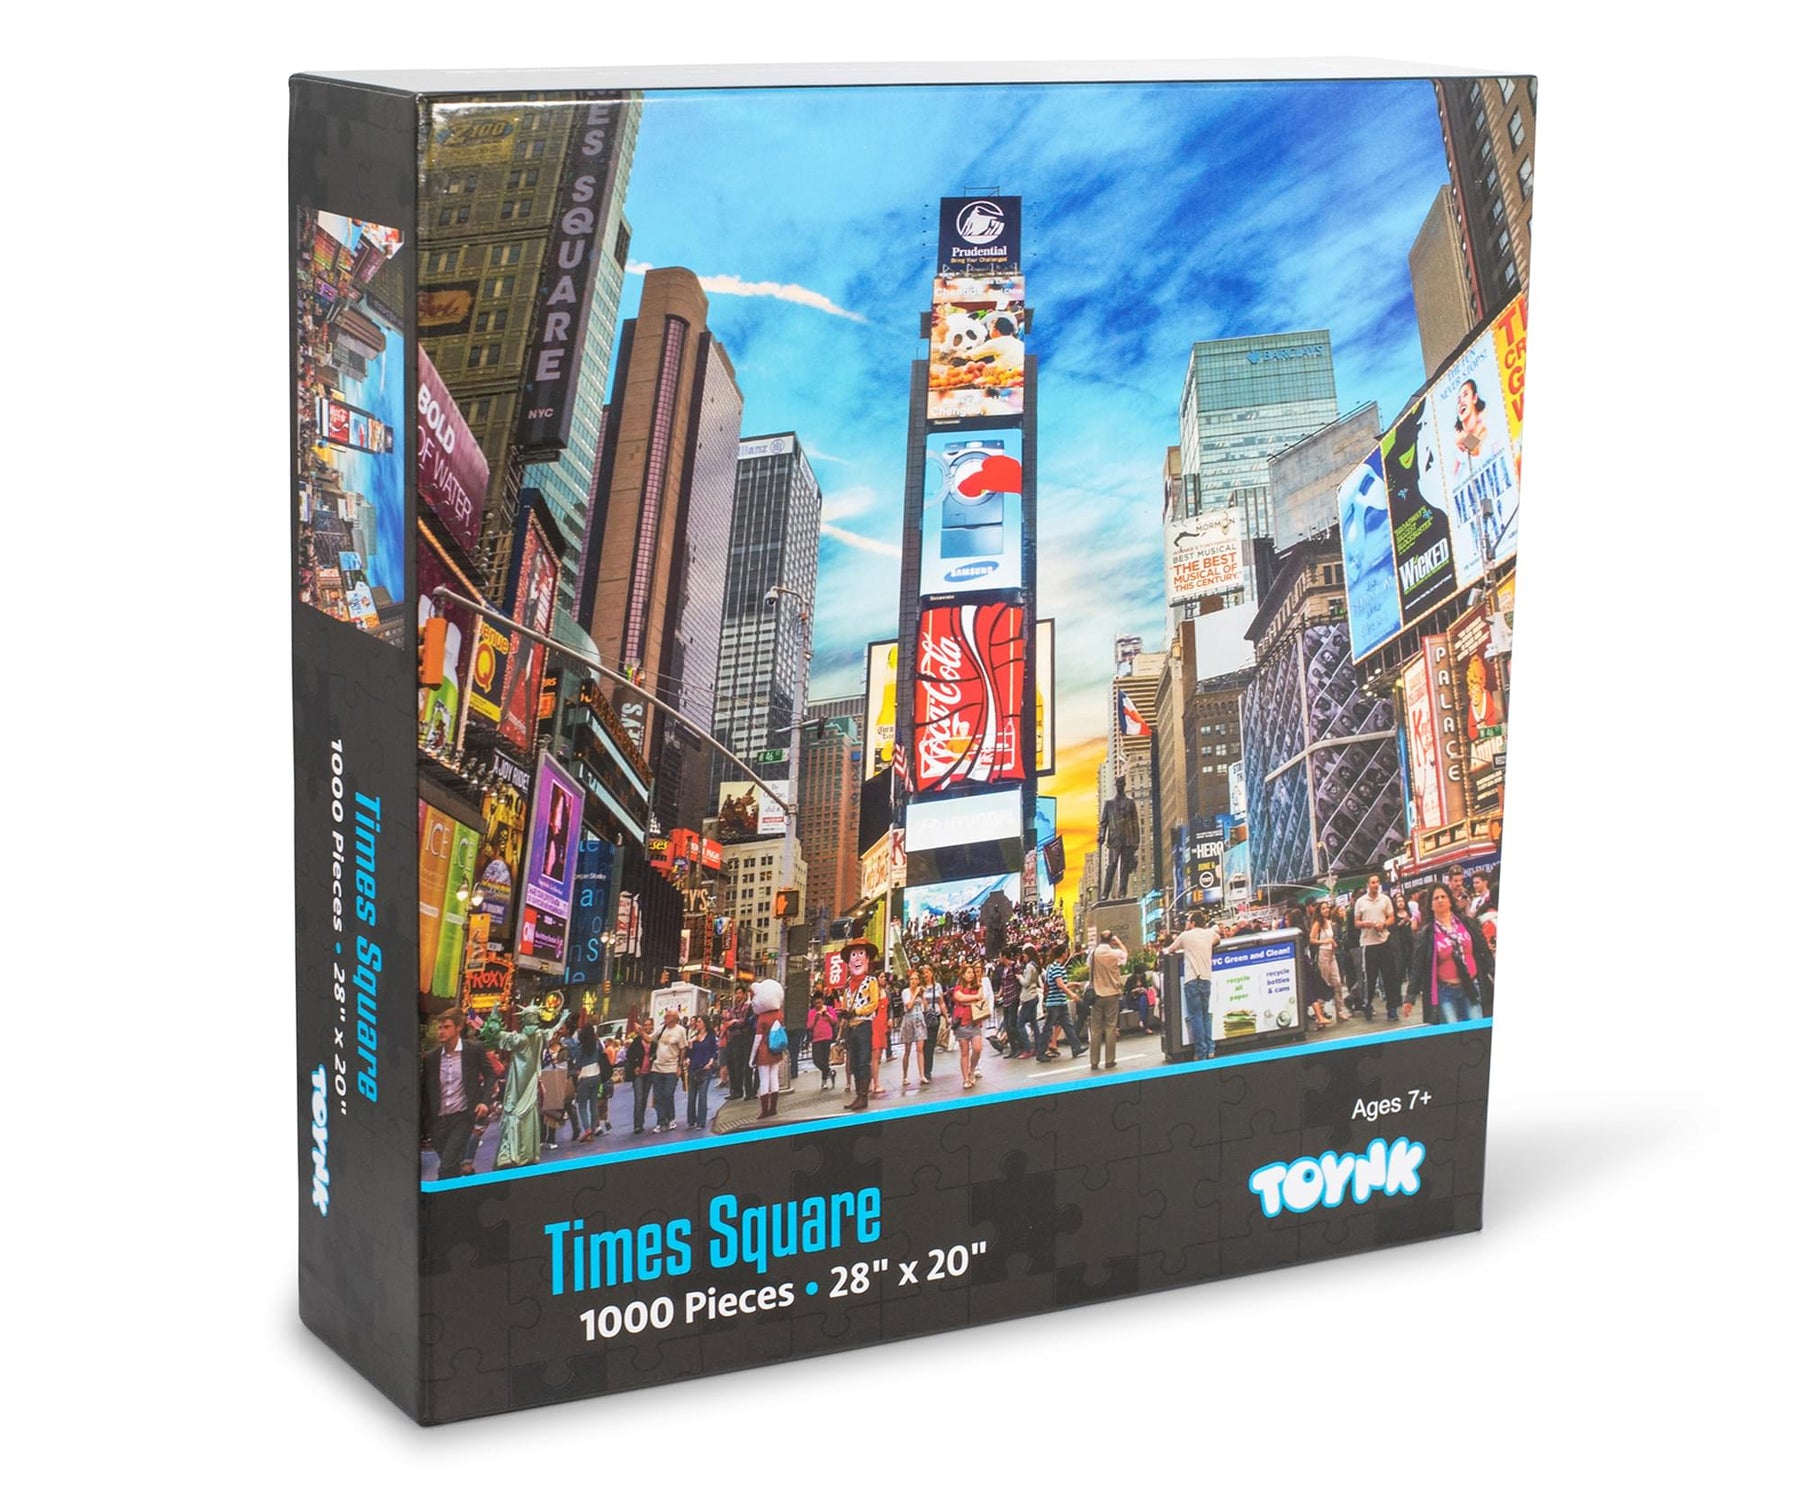 New York Times Square Puzzle | 1000 Piece Jigsaw Puzzle